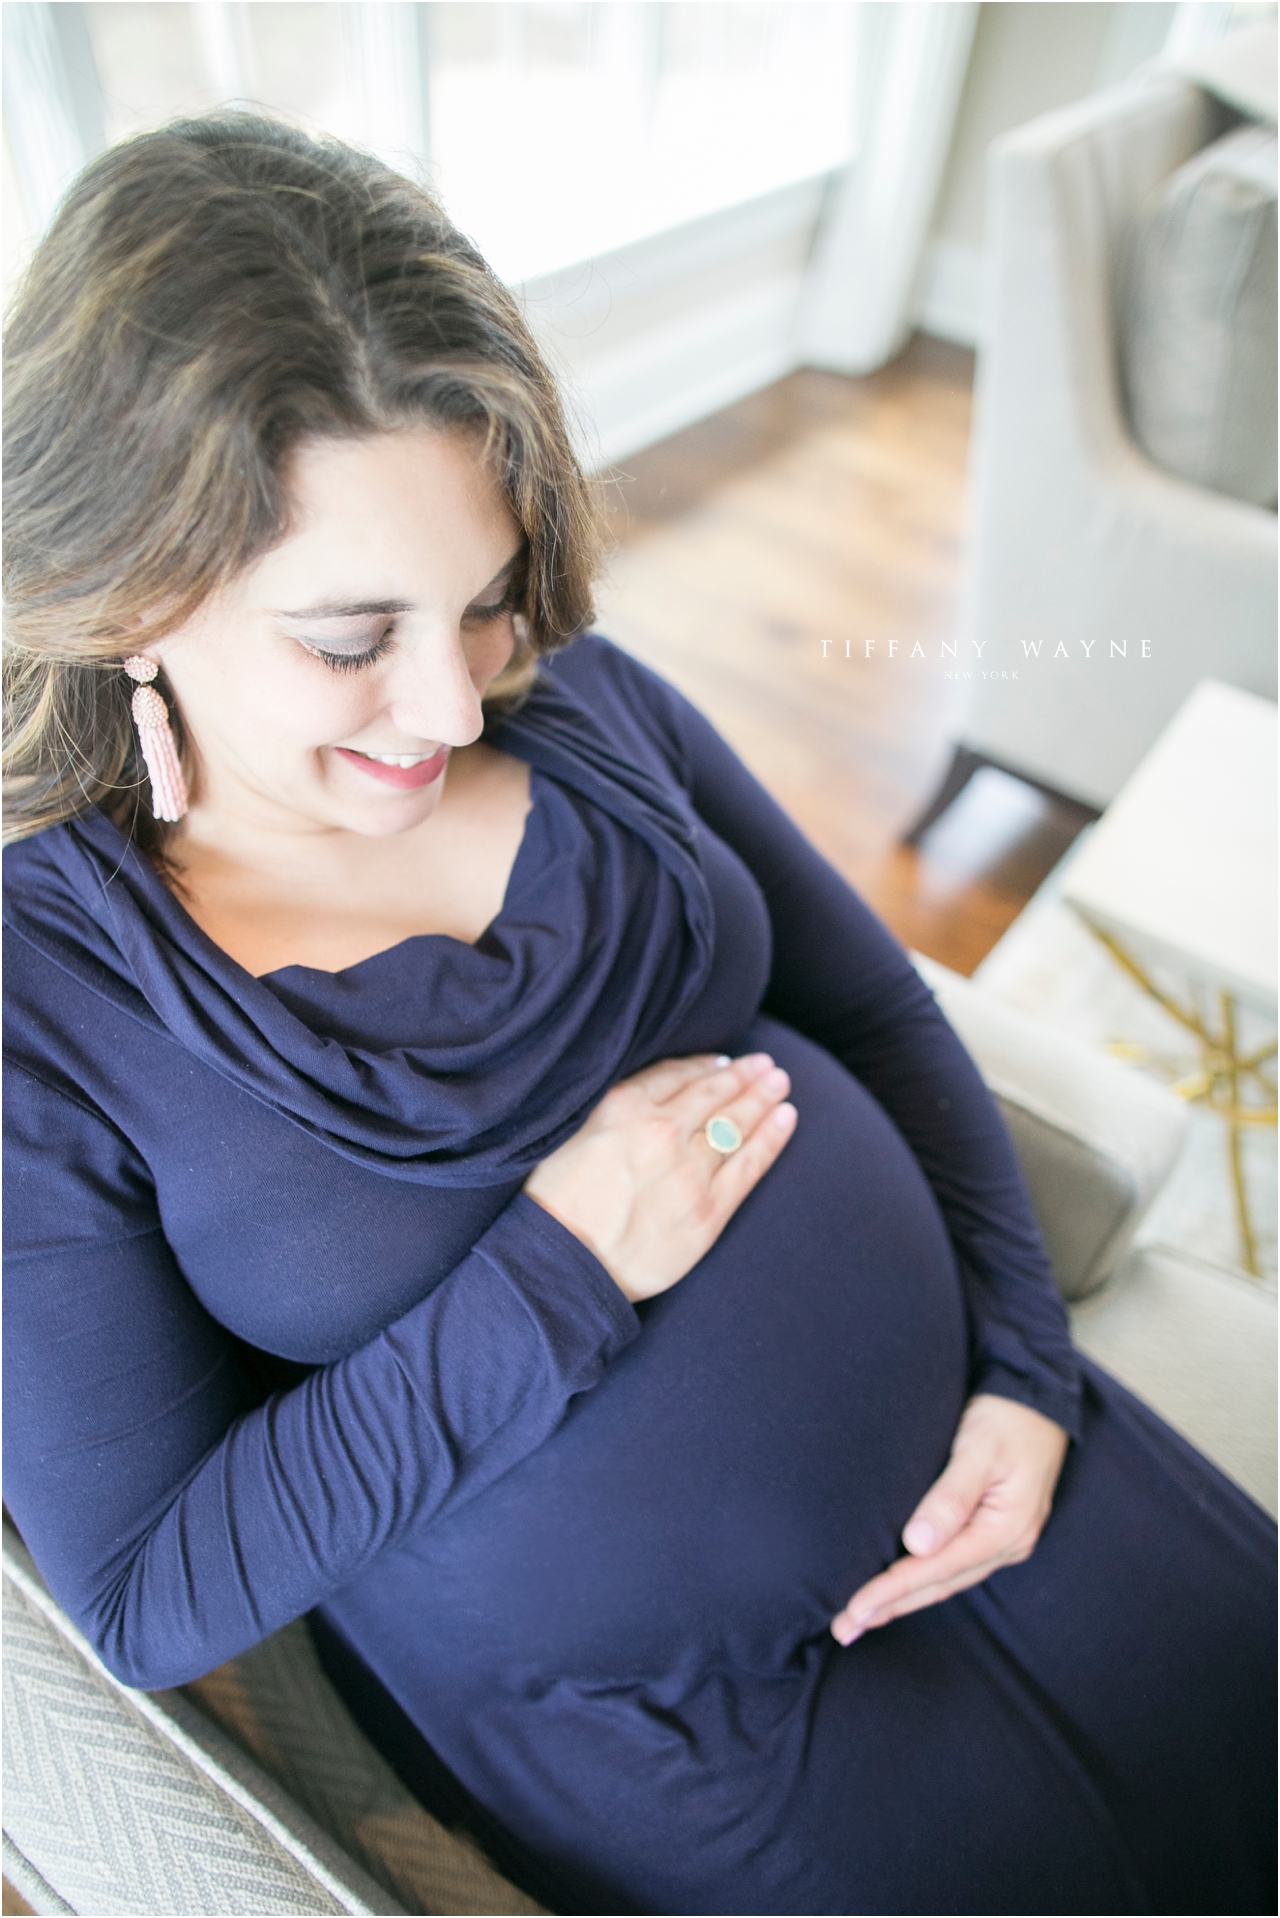 Lifestyle maternity session holding baby belly